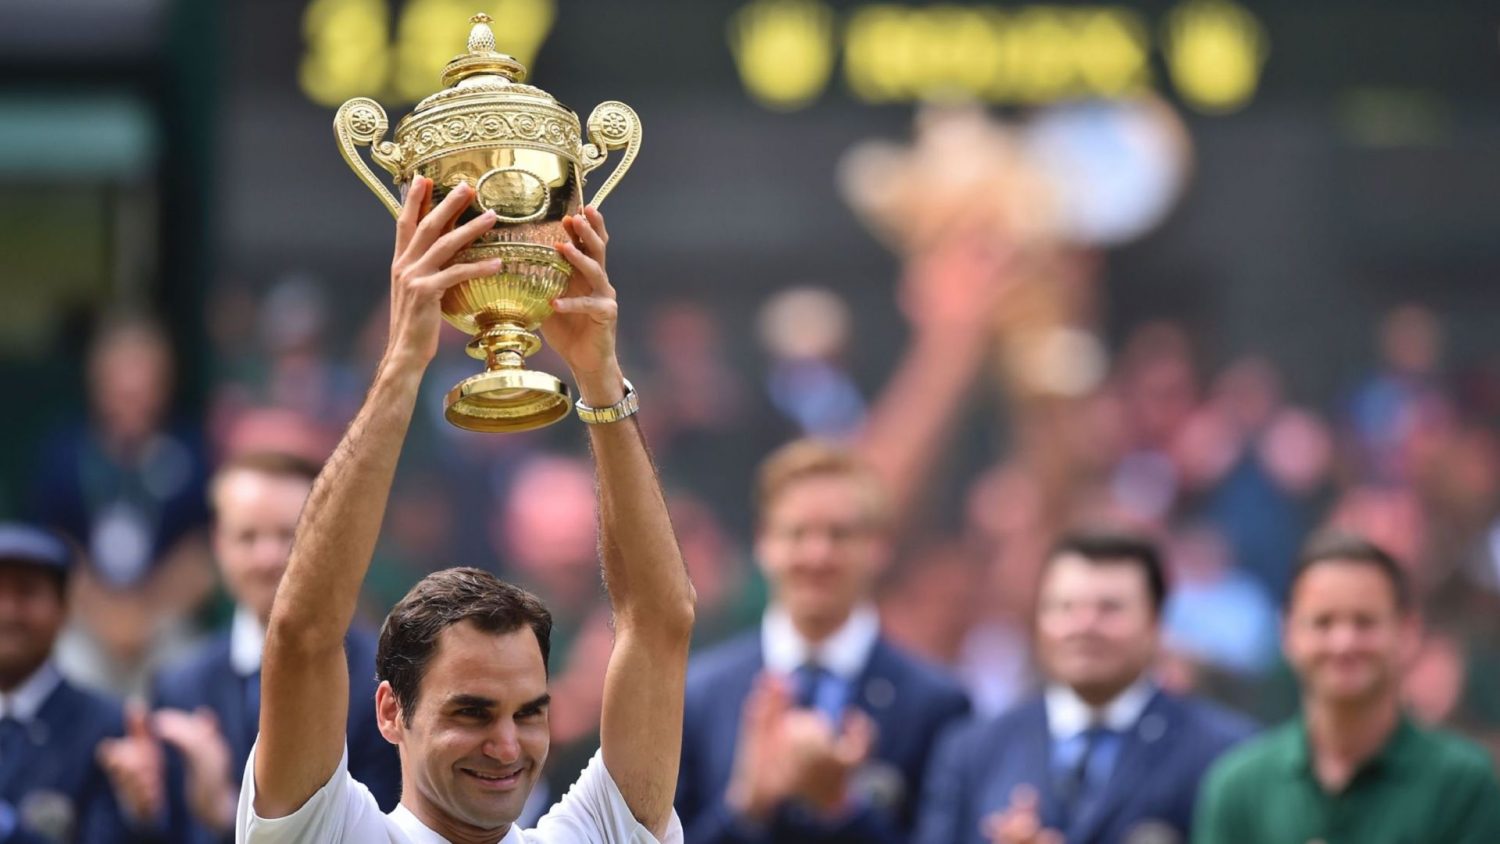 Switzerland’s Roger Federer holds the winner’s trophy after beating Croatia’s Marin Cilic in their men’s singles final match, during the presentation on the last day of the 2017 Wimbledon Championships at The All England Lawn Tennis Club in Wimbledon, southwest London, on July 16, 2017.
Roger Federer won 6-3, 6-1, 6-4.
 / AFP PHOTO / Glyn KIRK / RESTRICTED TO EDITORIAL USE        (Photo credit should read GLYN KIRK/AFP/Getty Images)